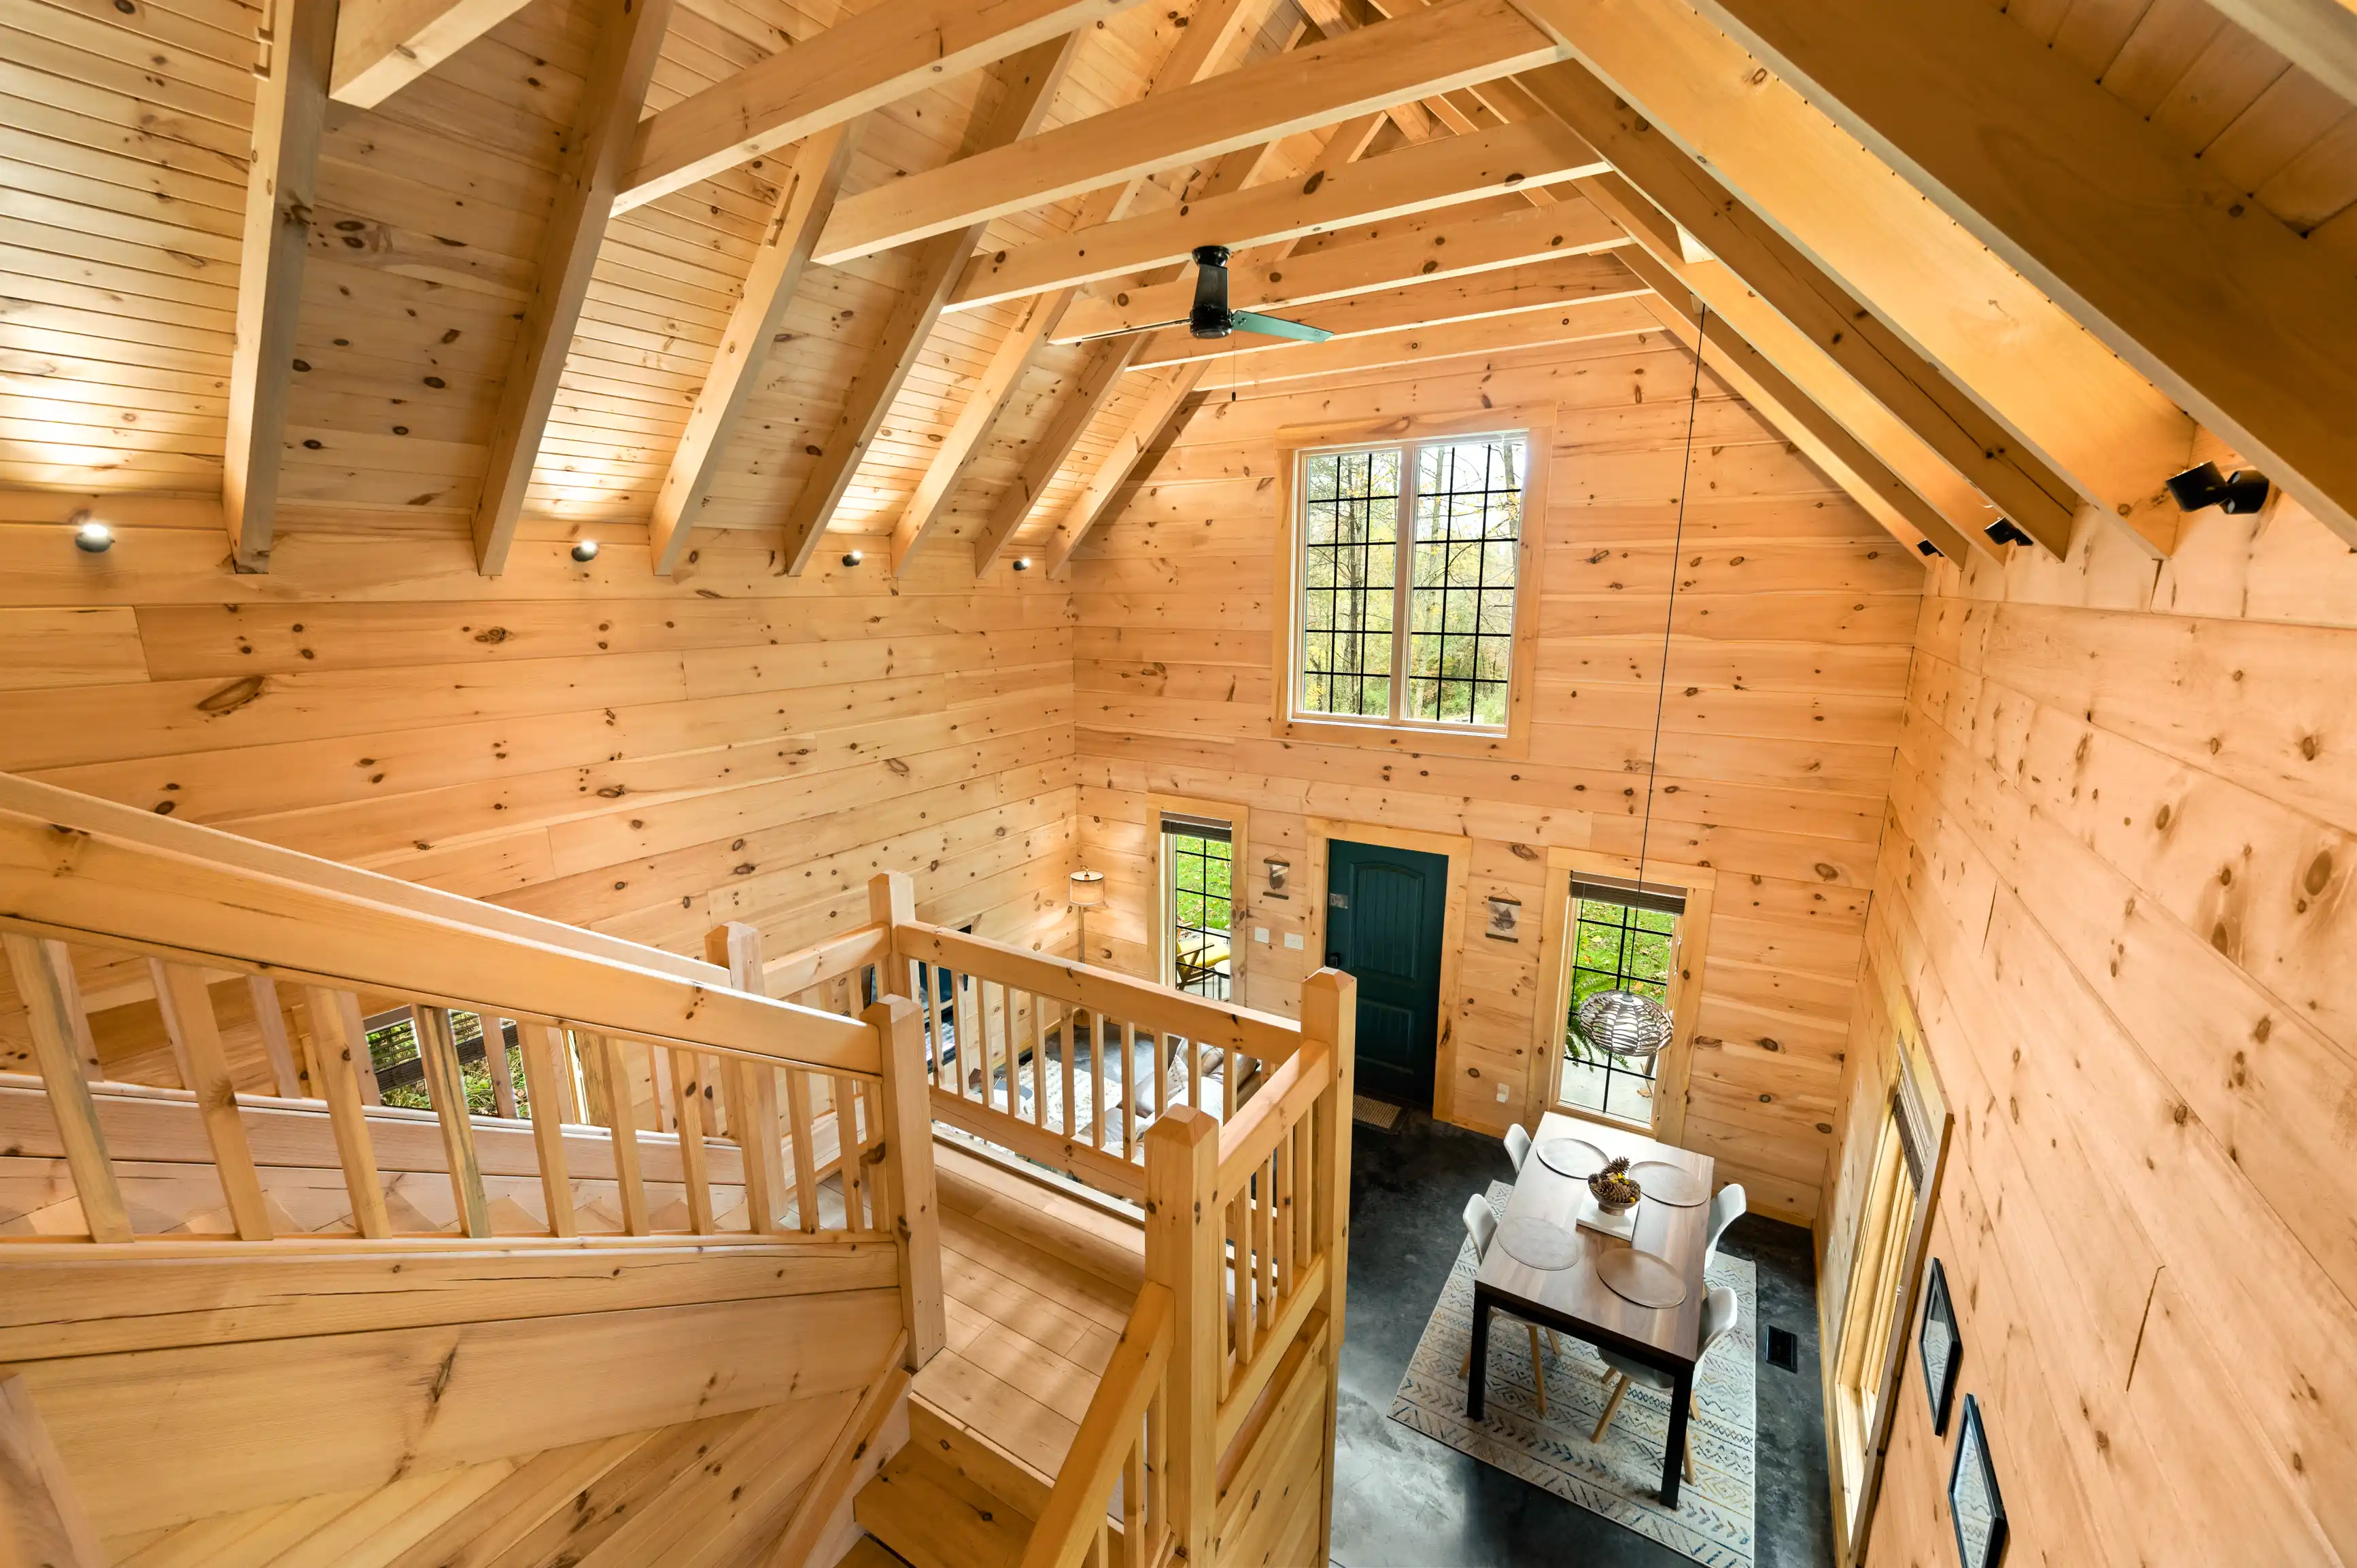 Interior view of a spacious cabin with wooden walls and rafters, featuring large windows and a rustic staircase leading to an upper floor.